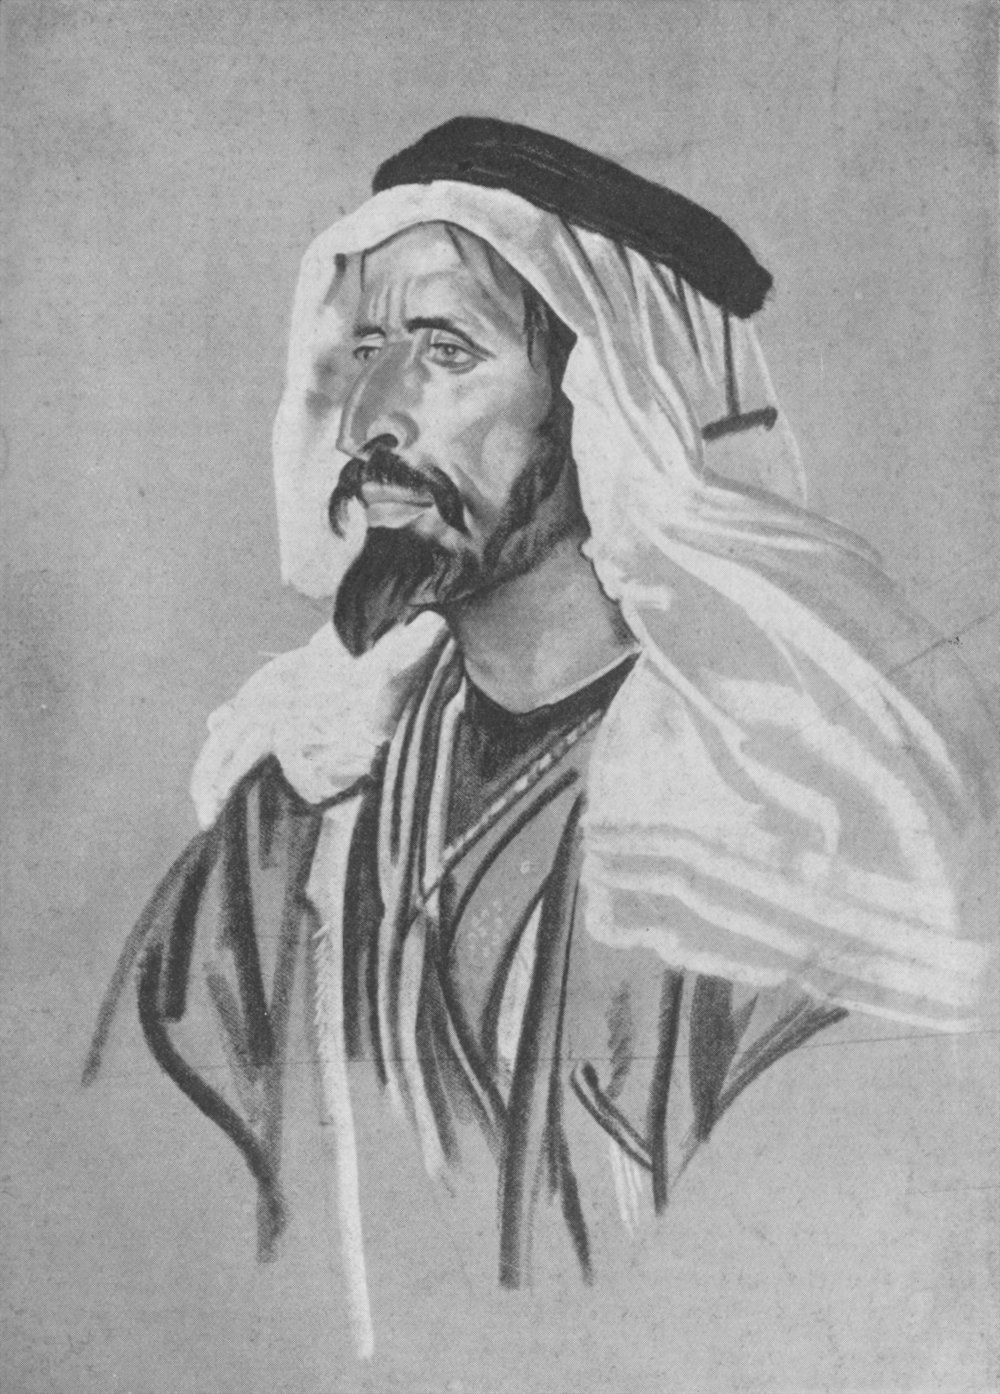 Portrait drawing 3⁄4 view chest up of a man in Arab dress